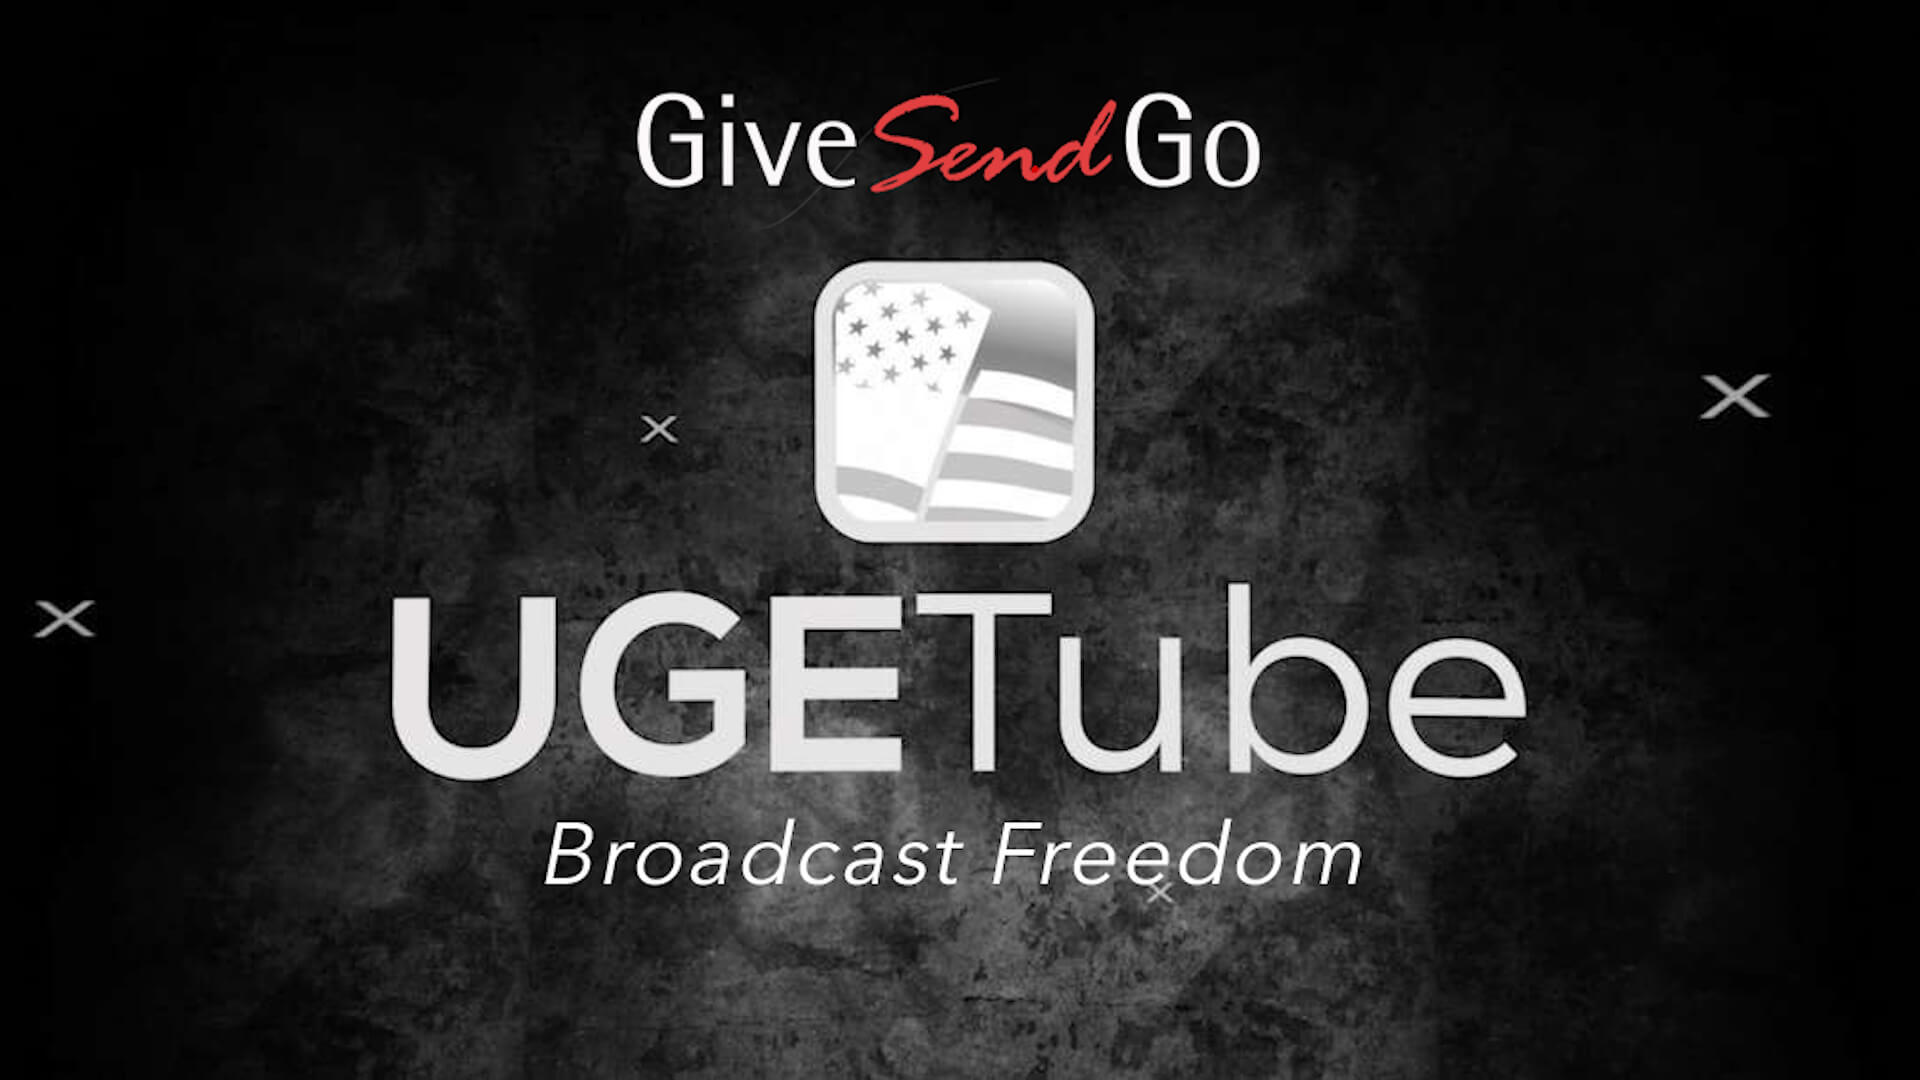 UGETube - Premier FREE SPEECH Video-Sharing! BACK US NOW (click COLORED GIVE SEND GO button above to help)!